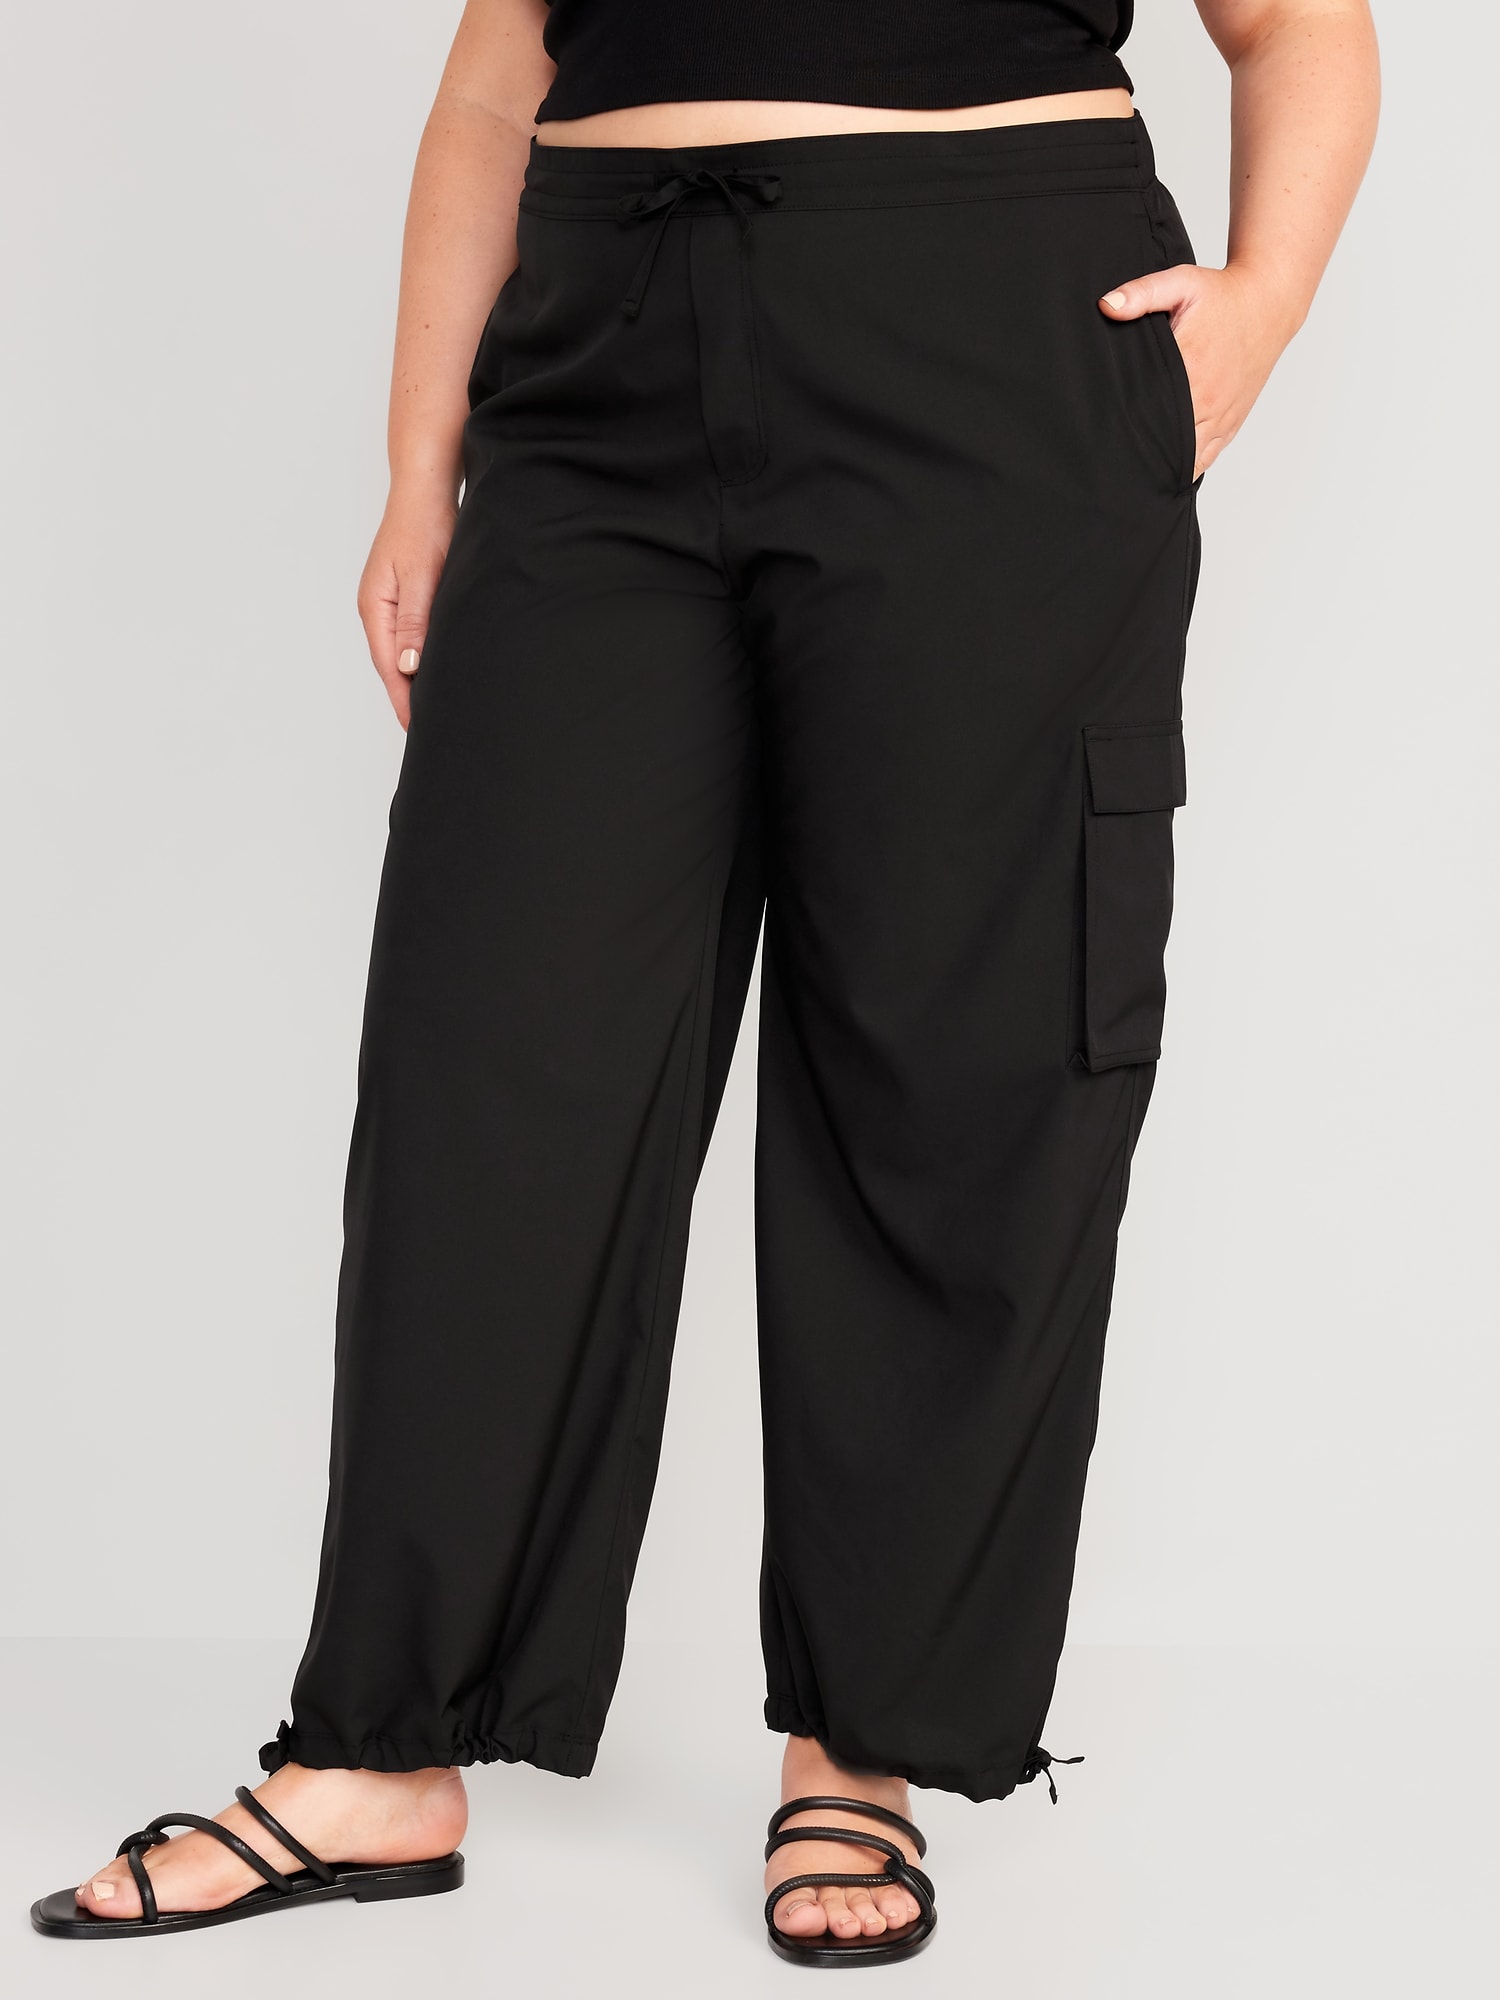 High-Waisted StretchTech Wide-Leg Cargo Pants for Women | Old Navy